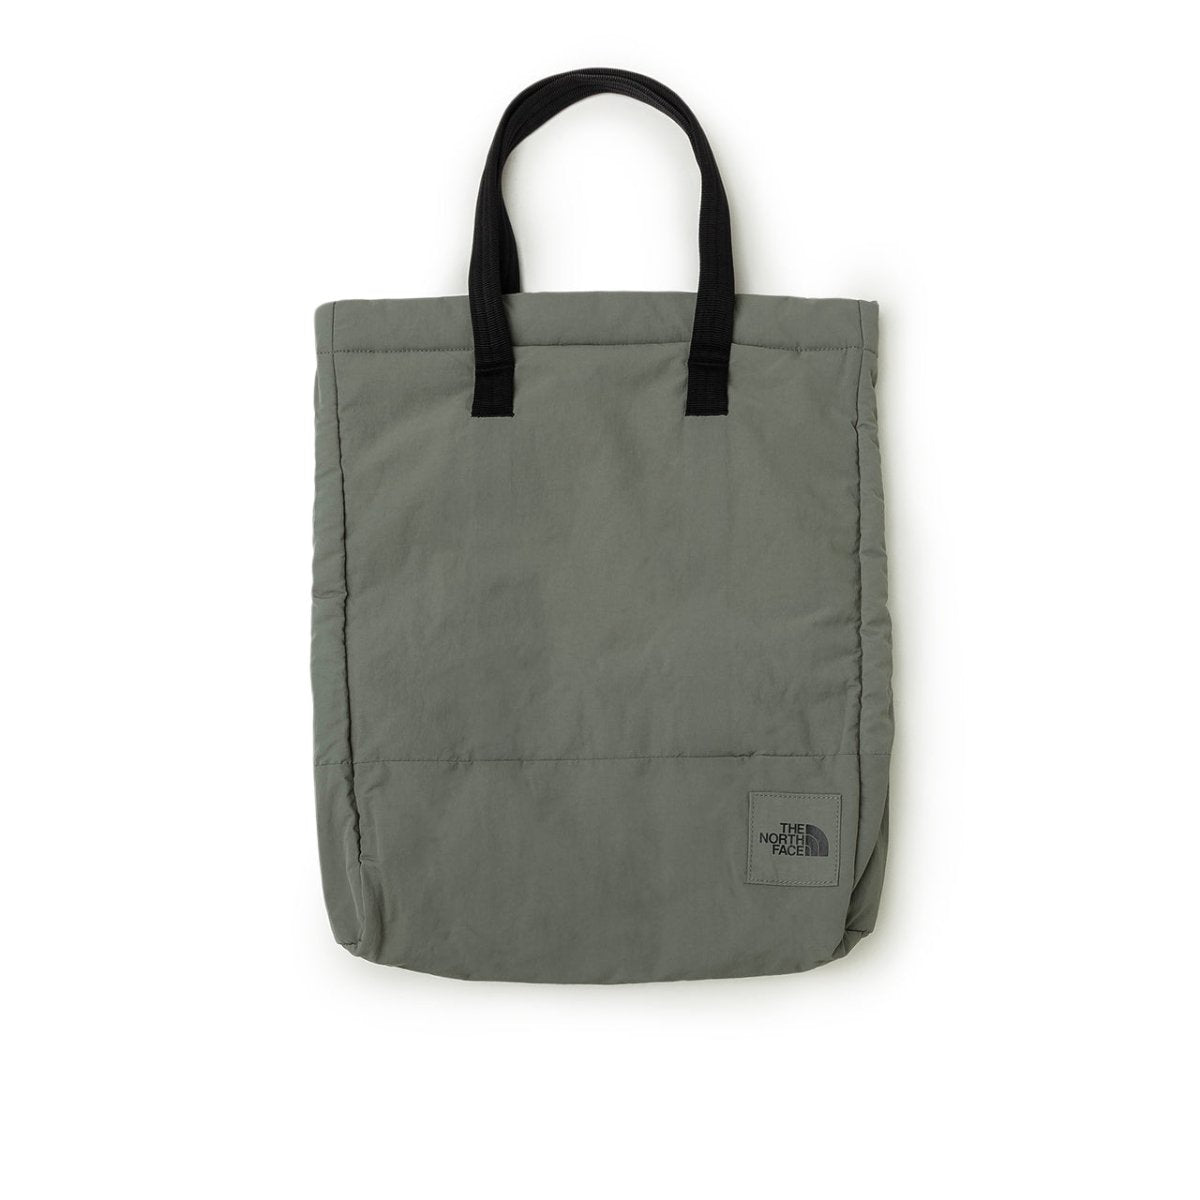 The North Face City Voyager Tote Bag (Grün)  - Allike Store